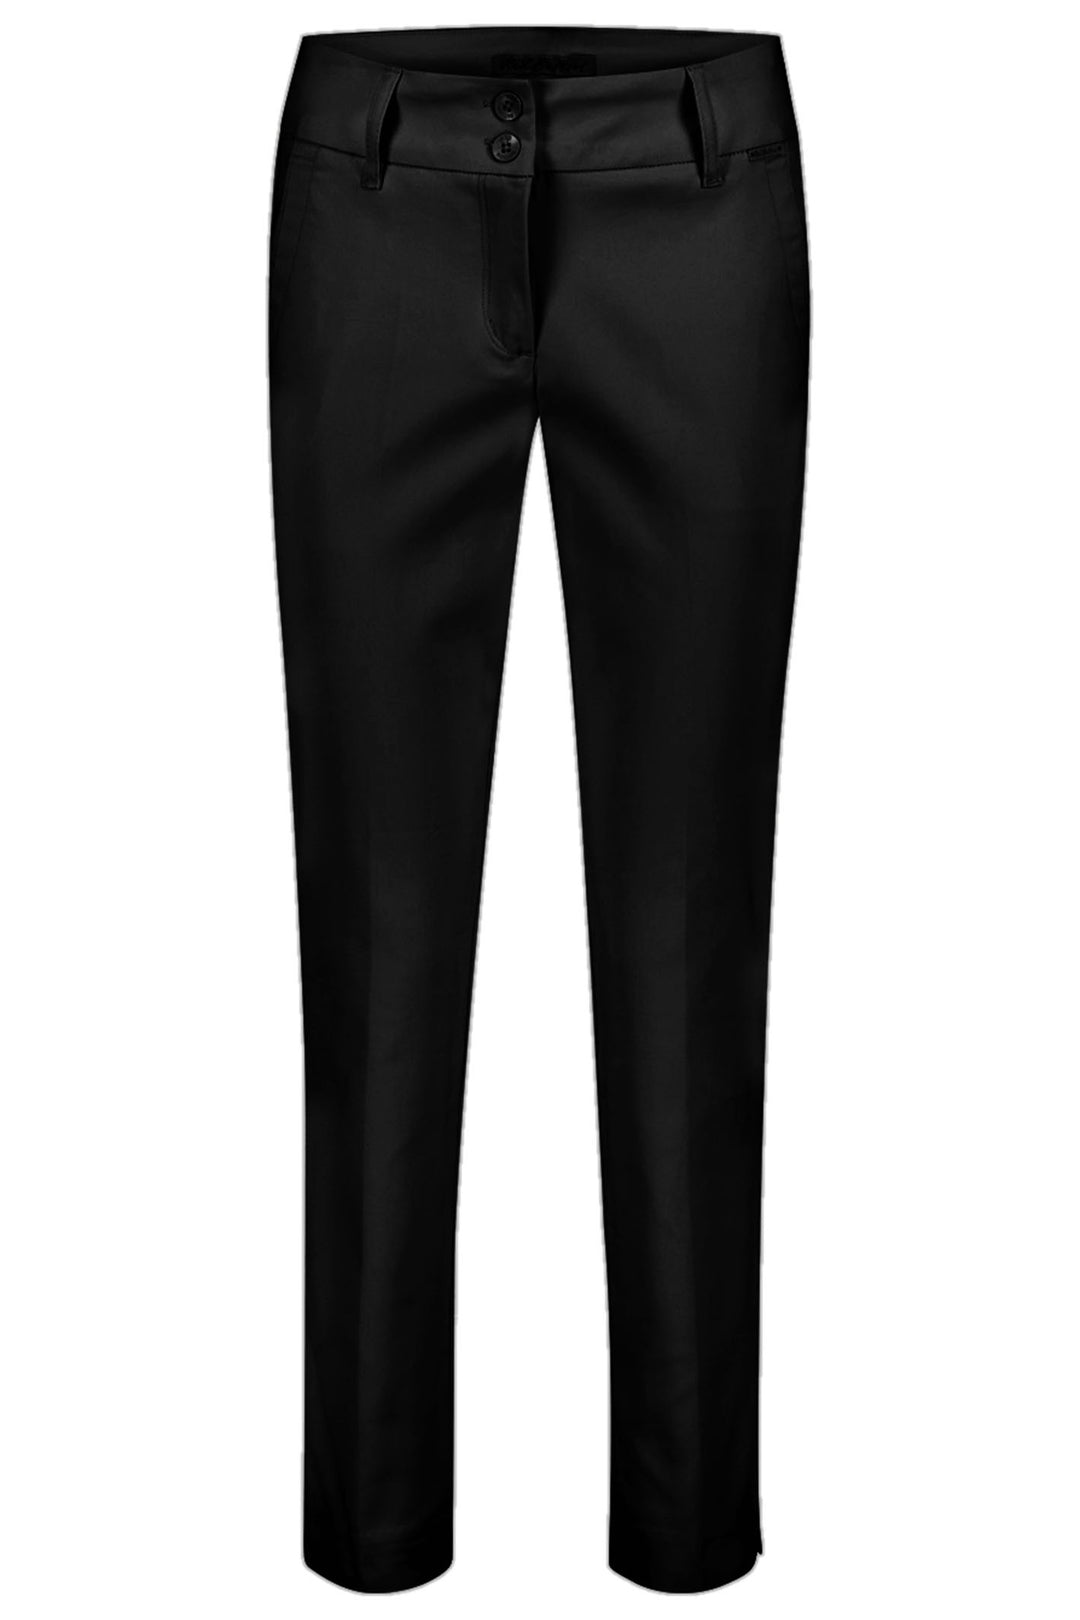 Red Button SRB4205 Diana Crop Black Smart Tapered Trousers - Dotique